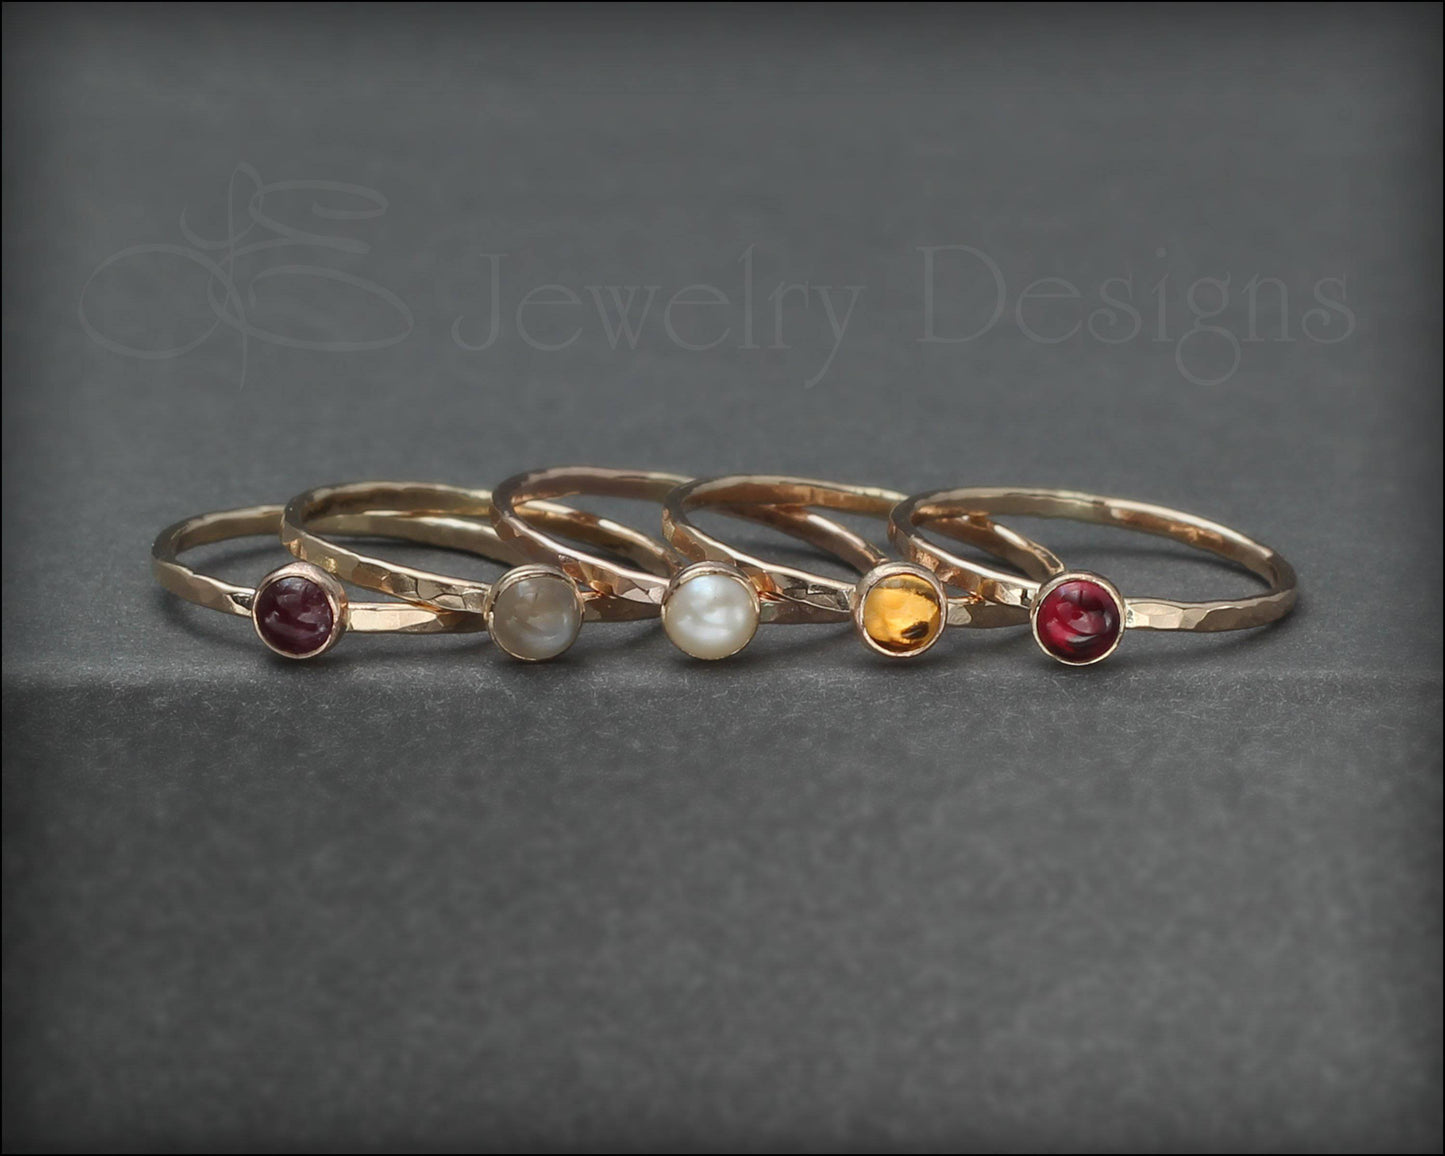 Load image into Gallery viewer, Gemstone Stacking Ring - (silver, gold) - LE Jewelry Designs
